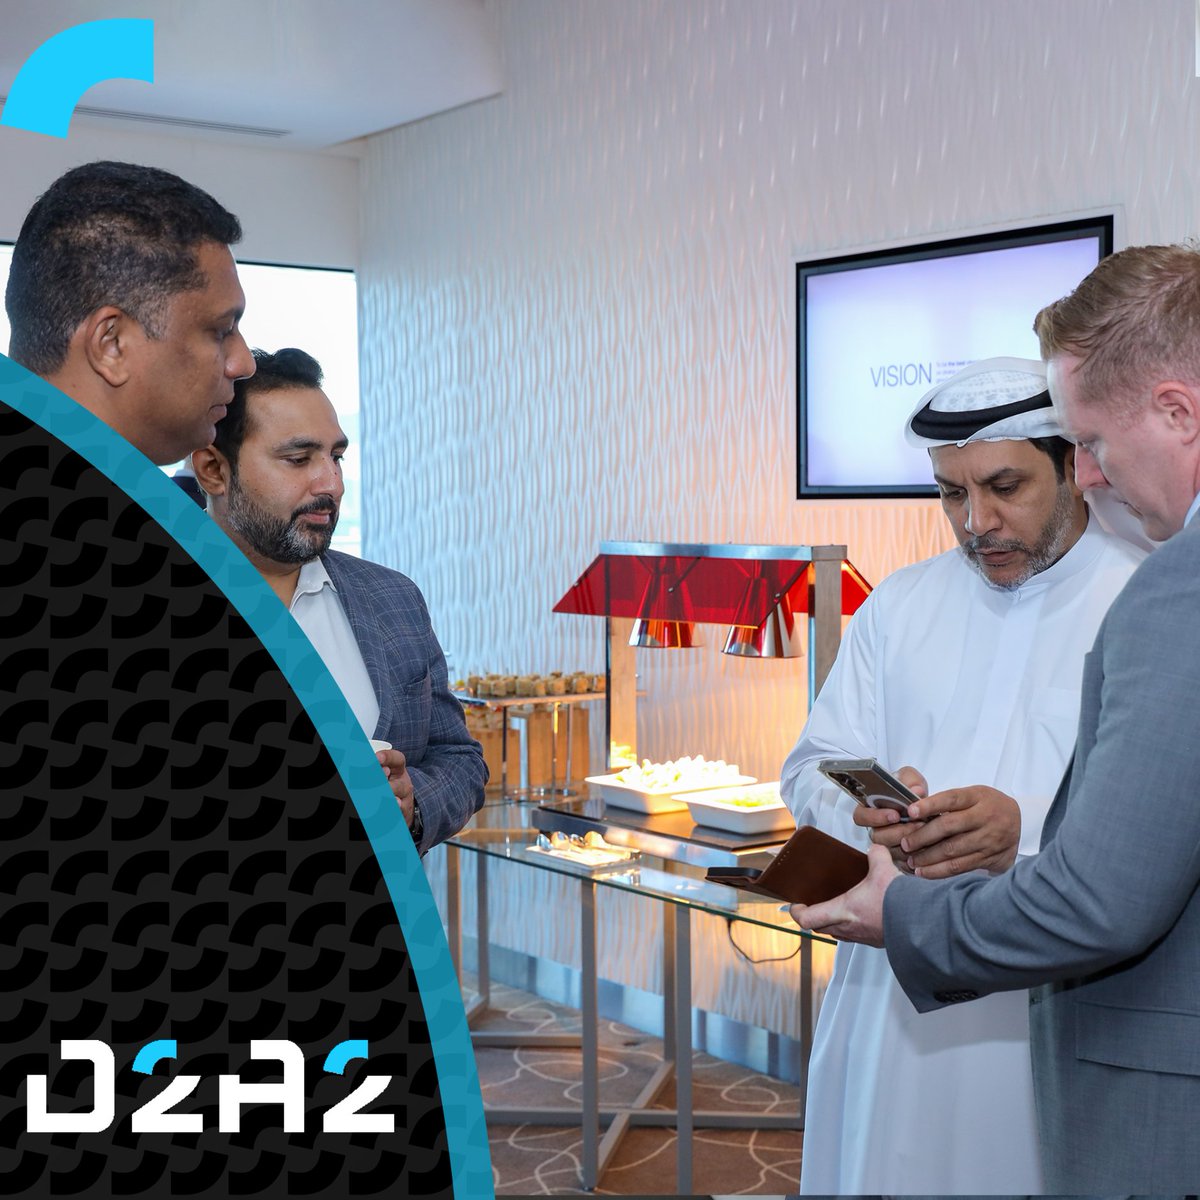 Exploring Dubai's virtual asset landscape: On 01 March, D2A2 hosted a groundbreaking 'Year in Review' roundtable with Dubai Chambers to discuss VARA's achievements and future reforms. Join the conversation! Apply for membership: d2a2form.typeform.com/D2A2-Form #D2A2